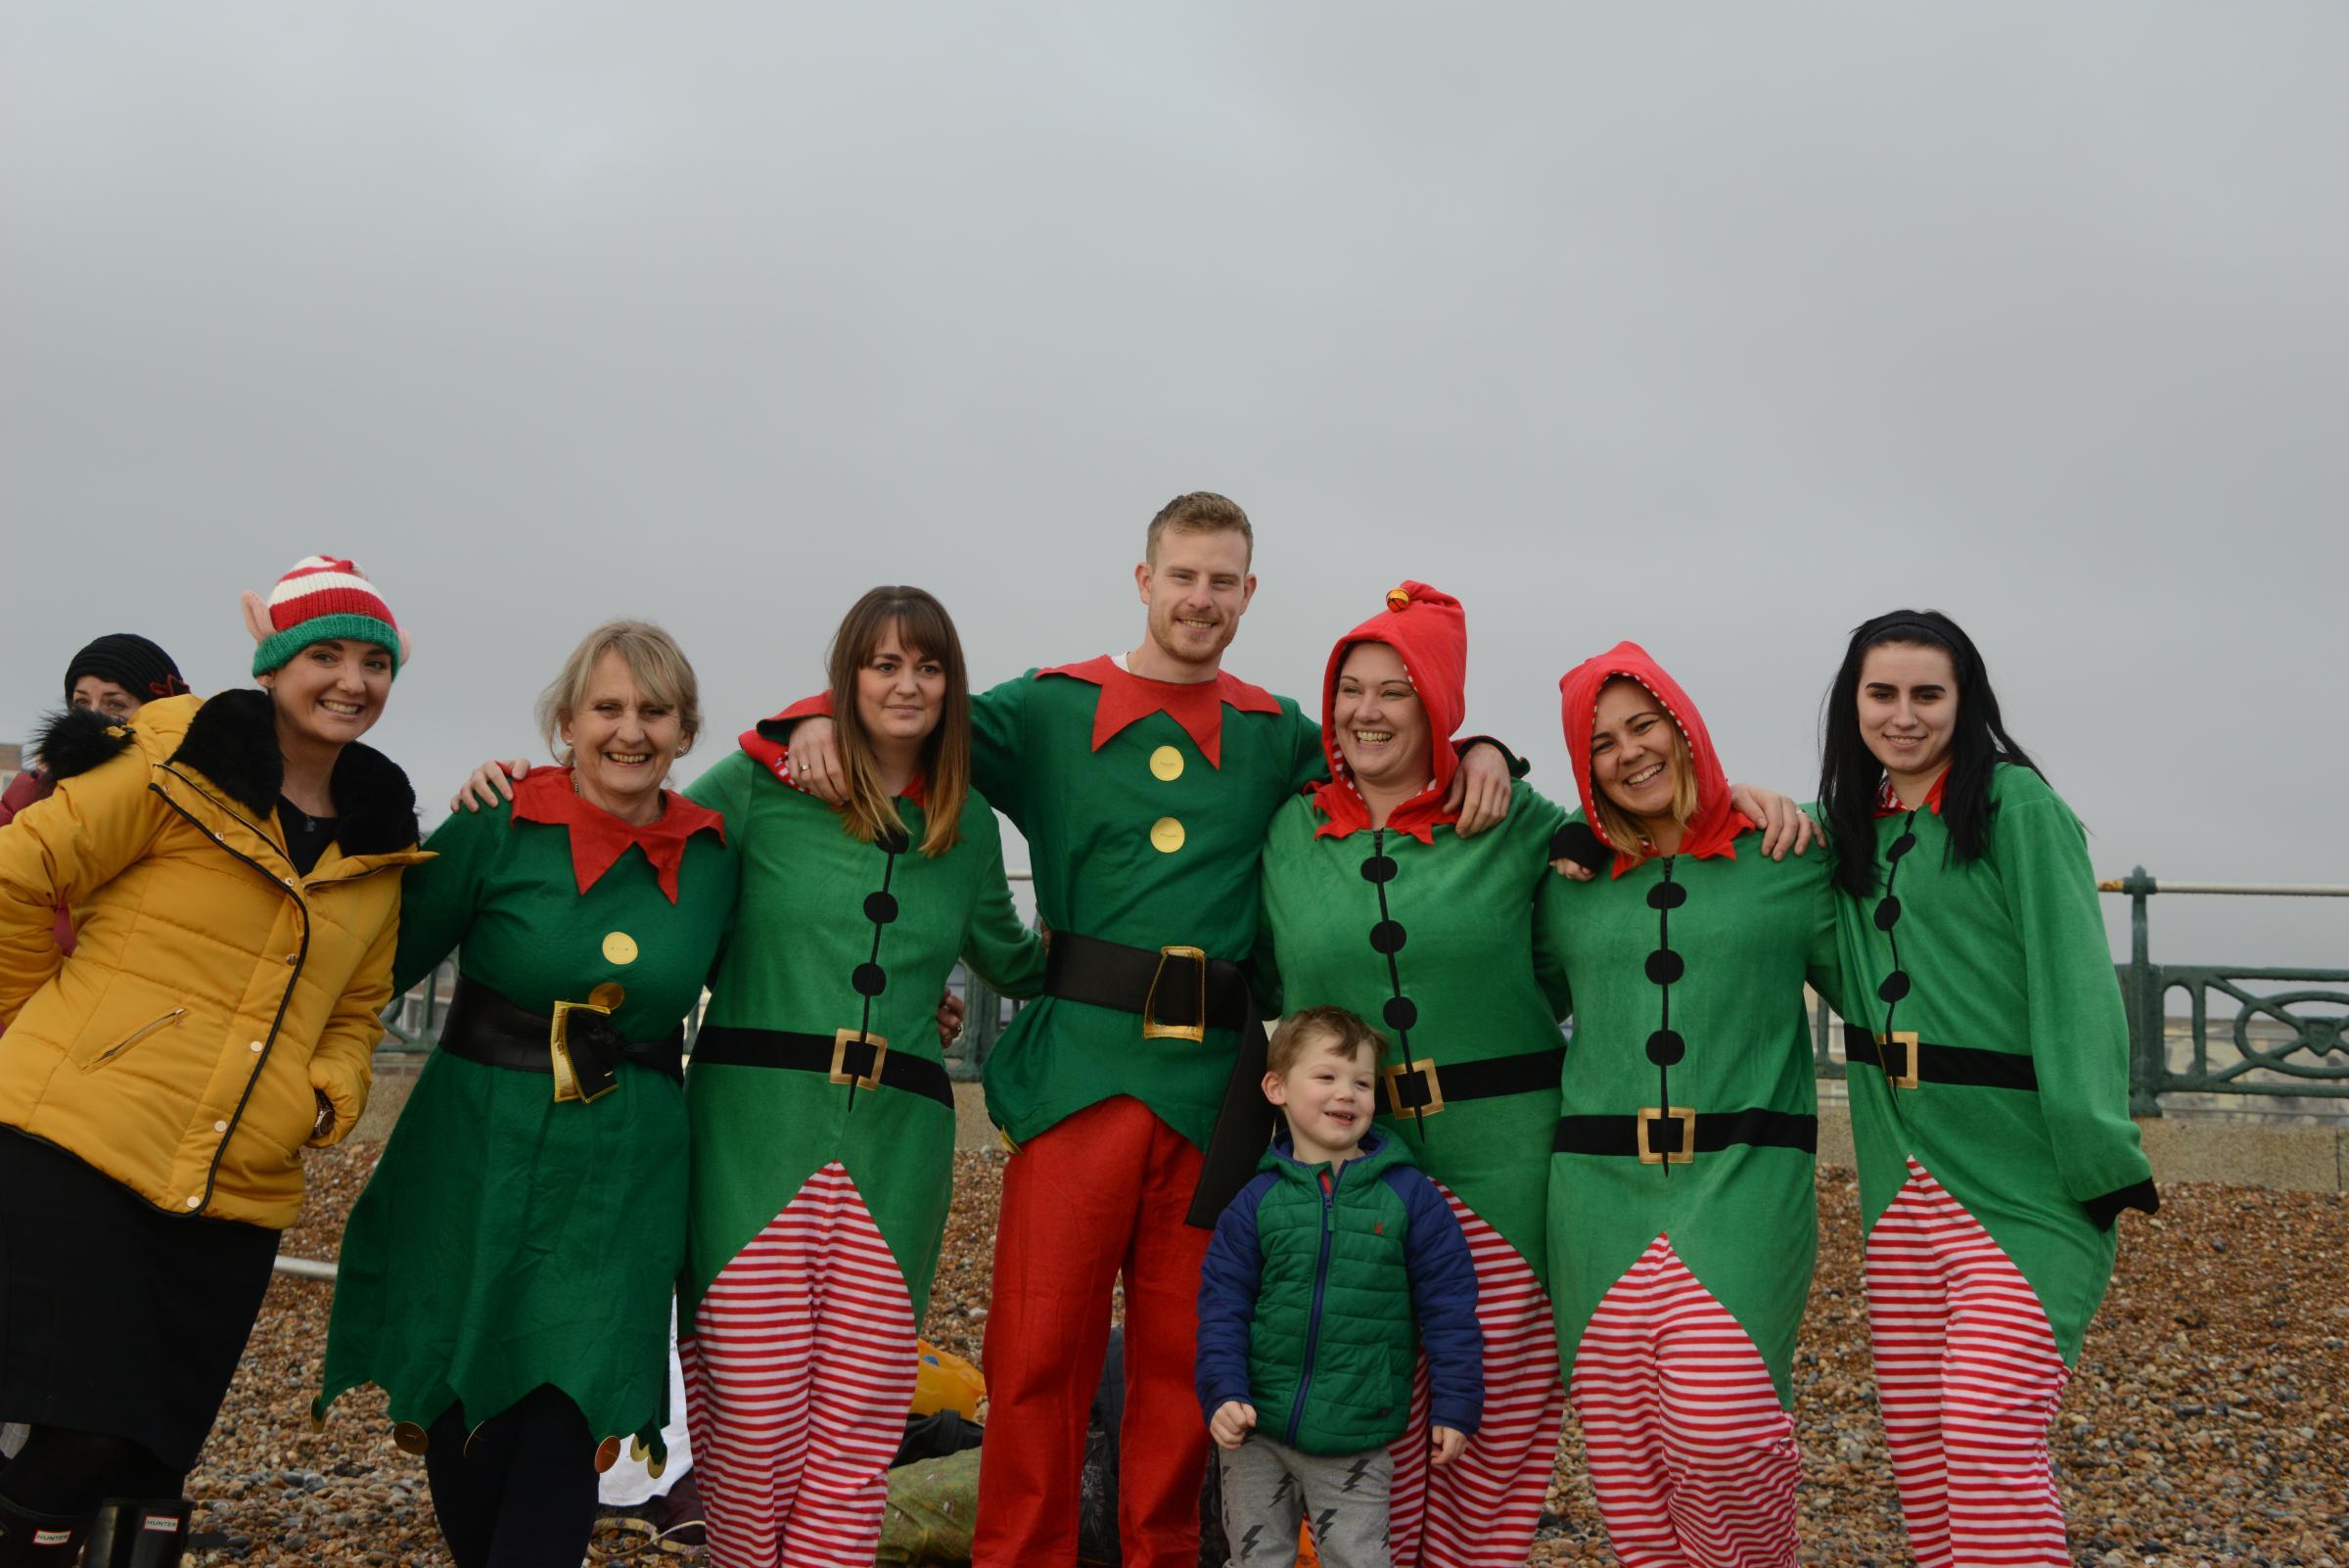 Property firm staff take on chilly festive charity challenge